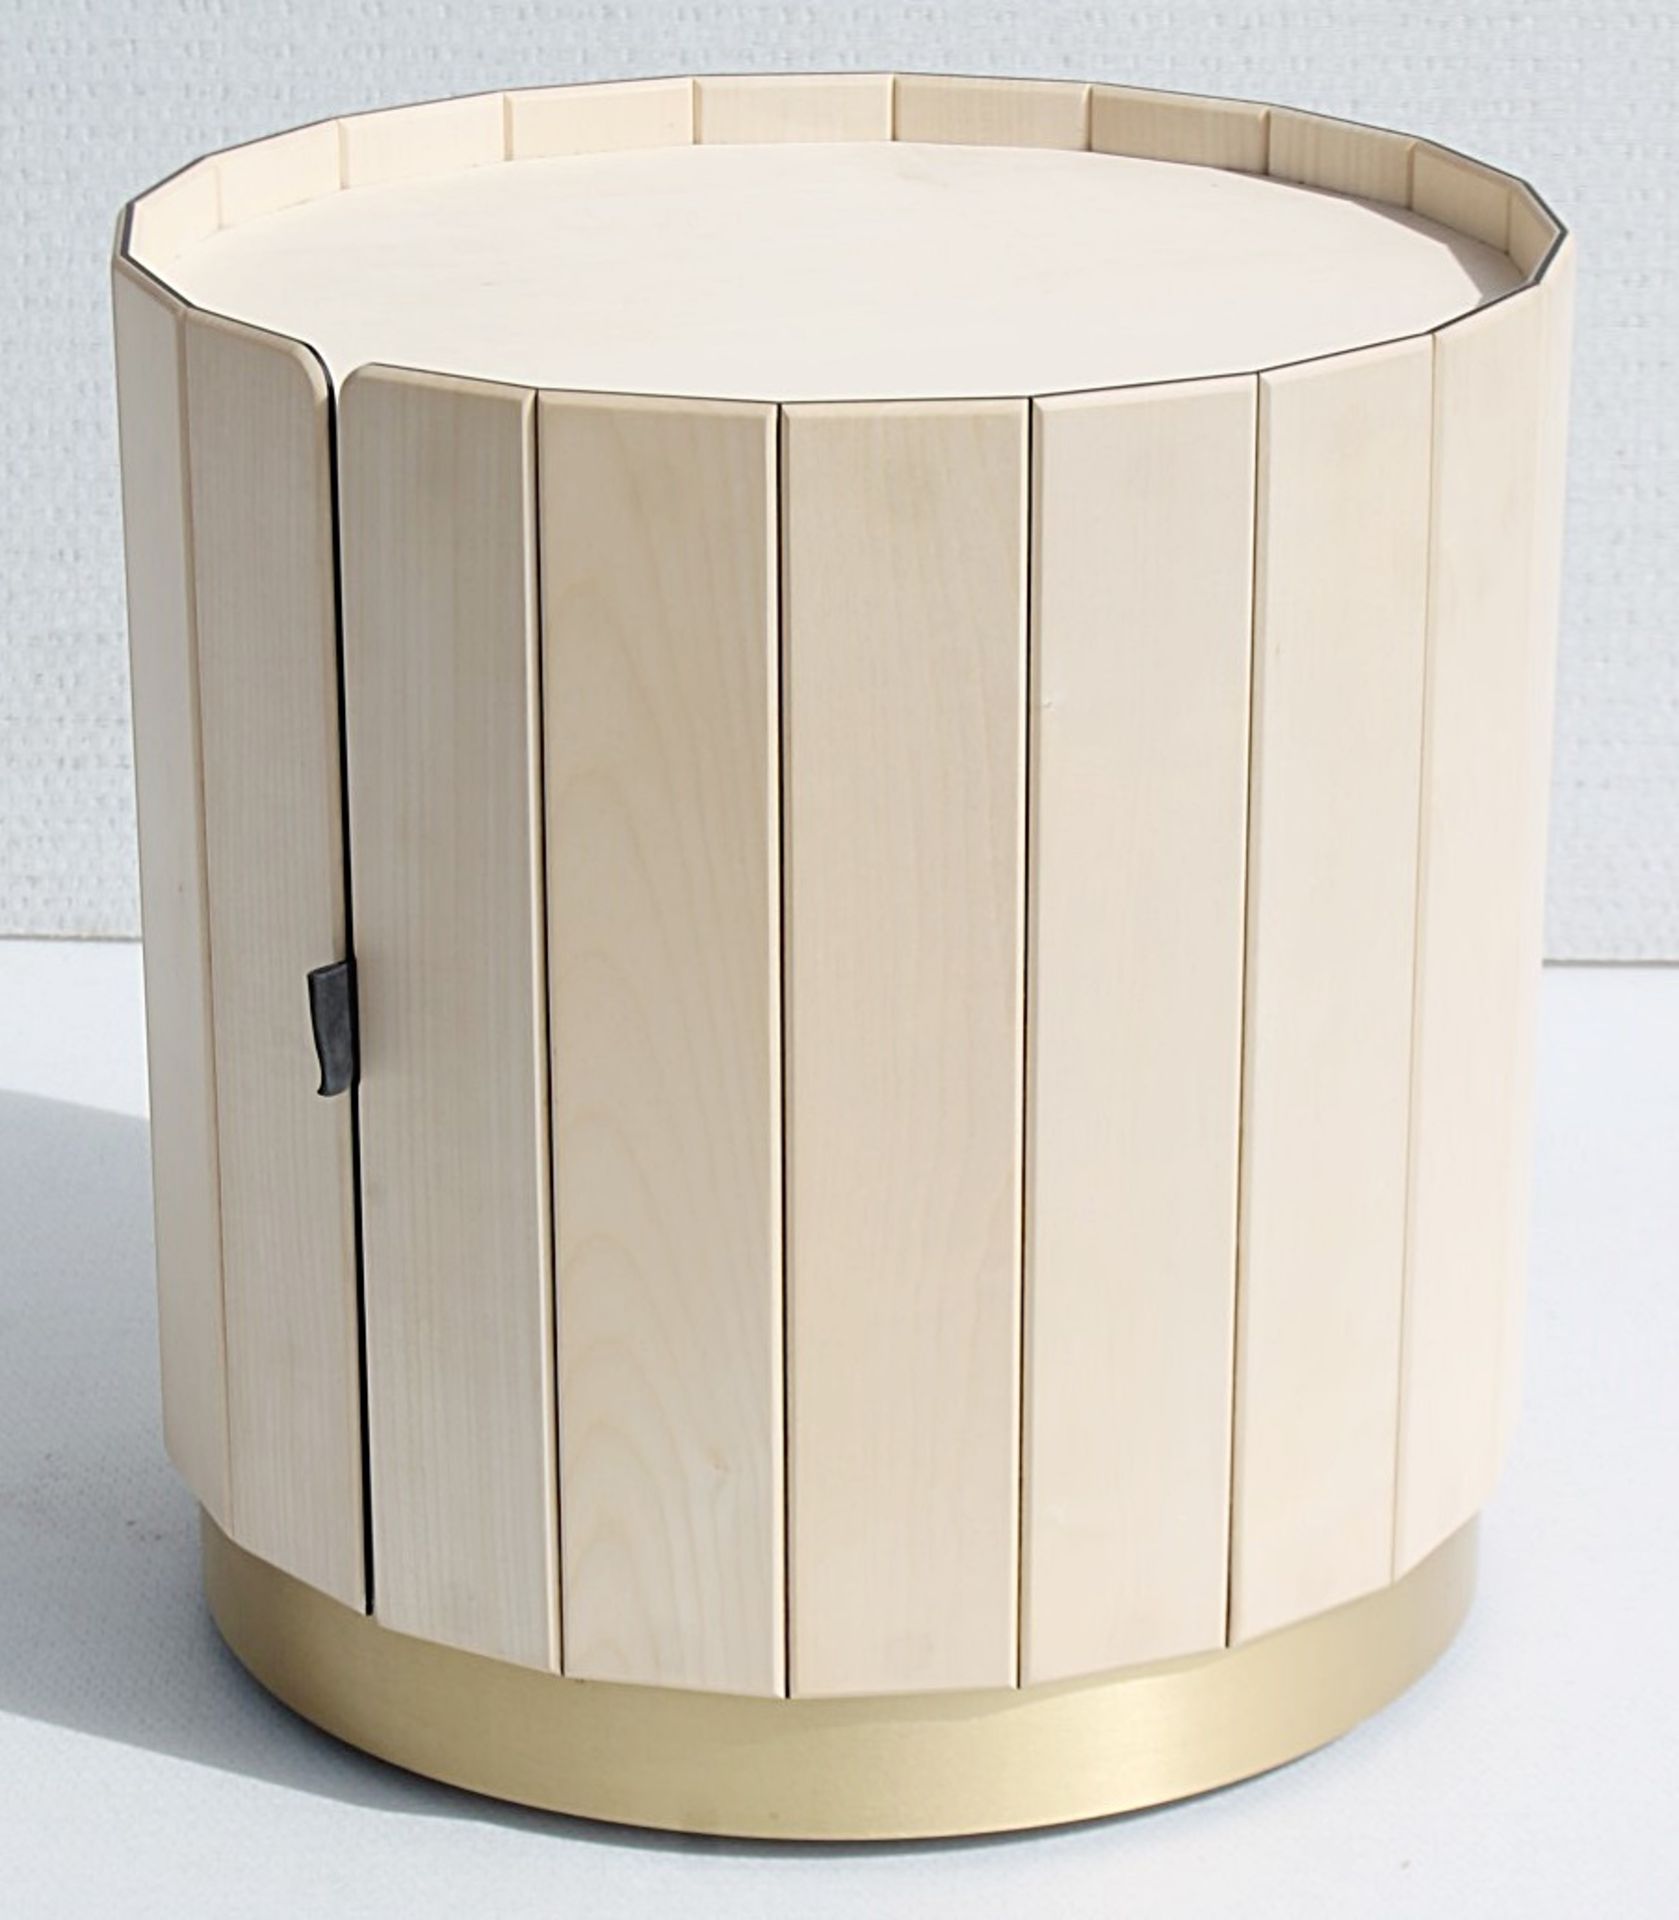 1 x BAXTER 'Ninfea' Italian Designer Solid Maple Bedside Table With Storage - Original Price £2,399 - Image 5 of 7